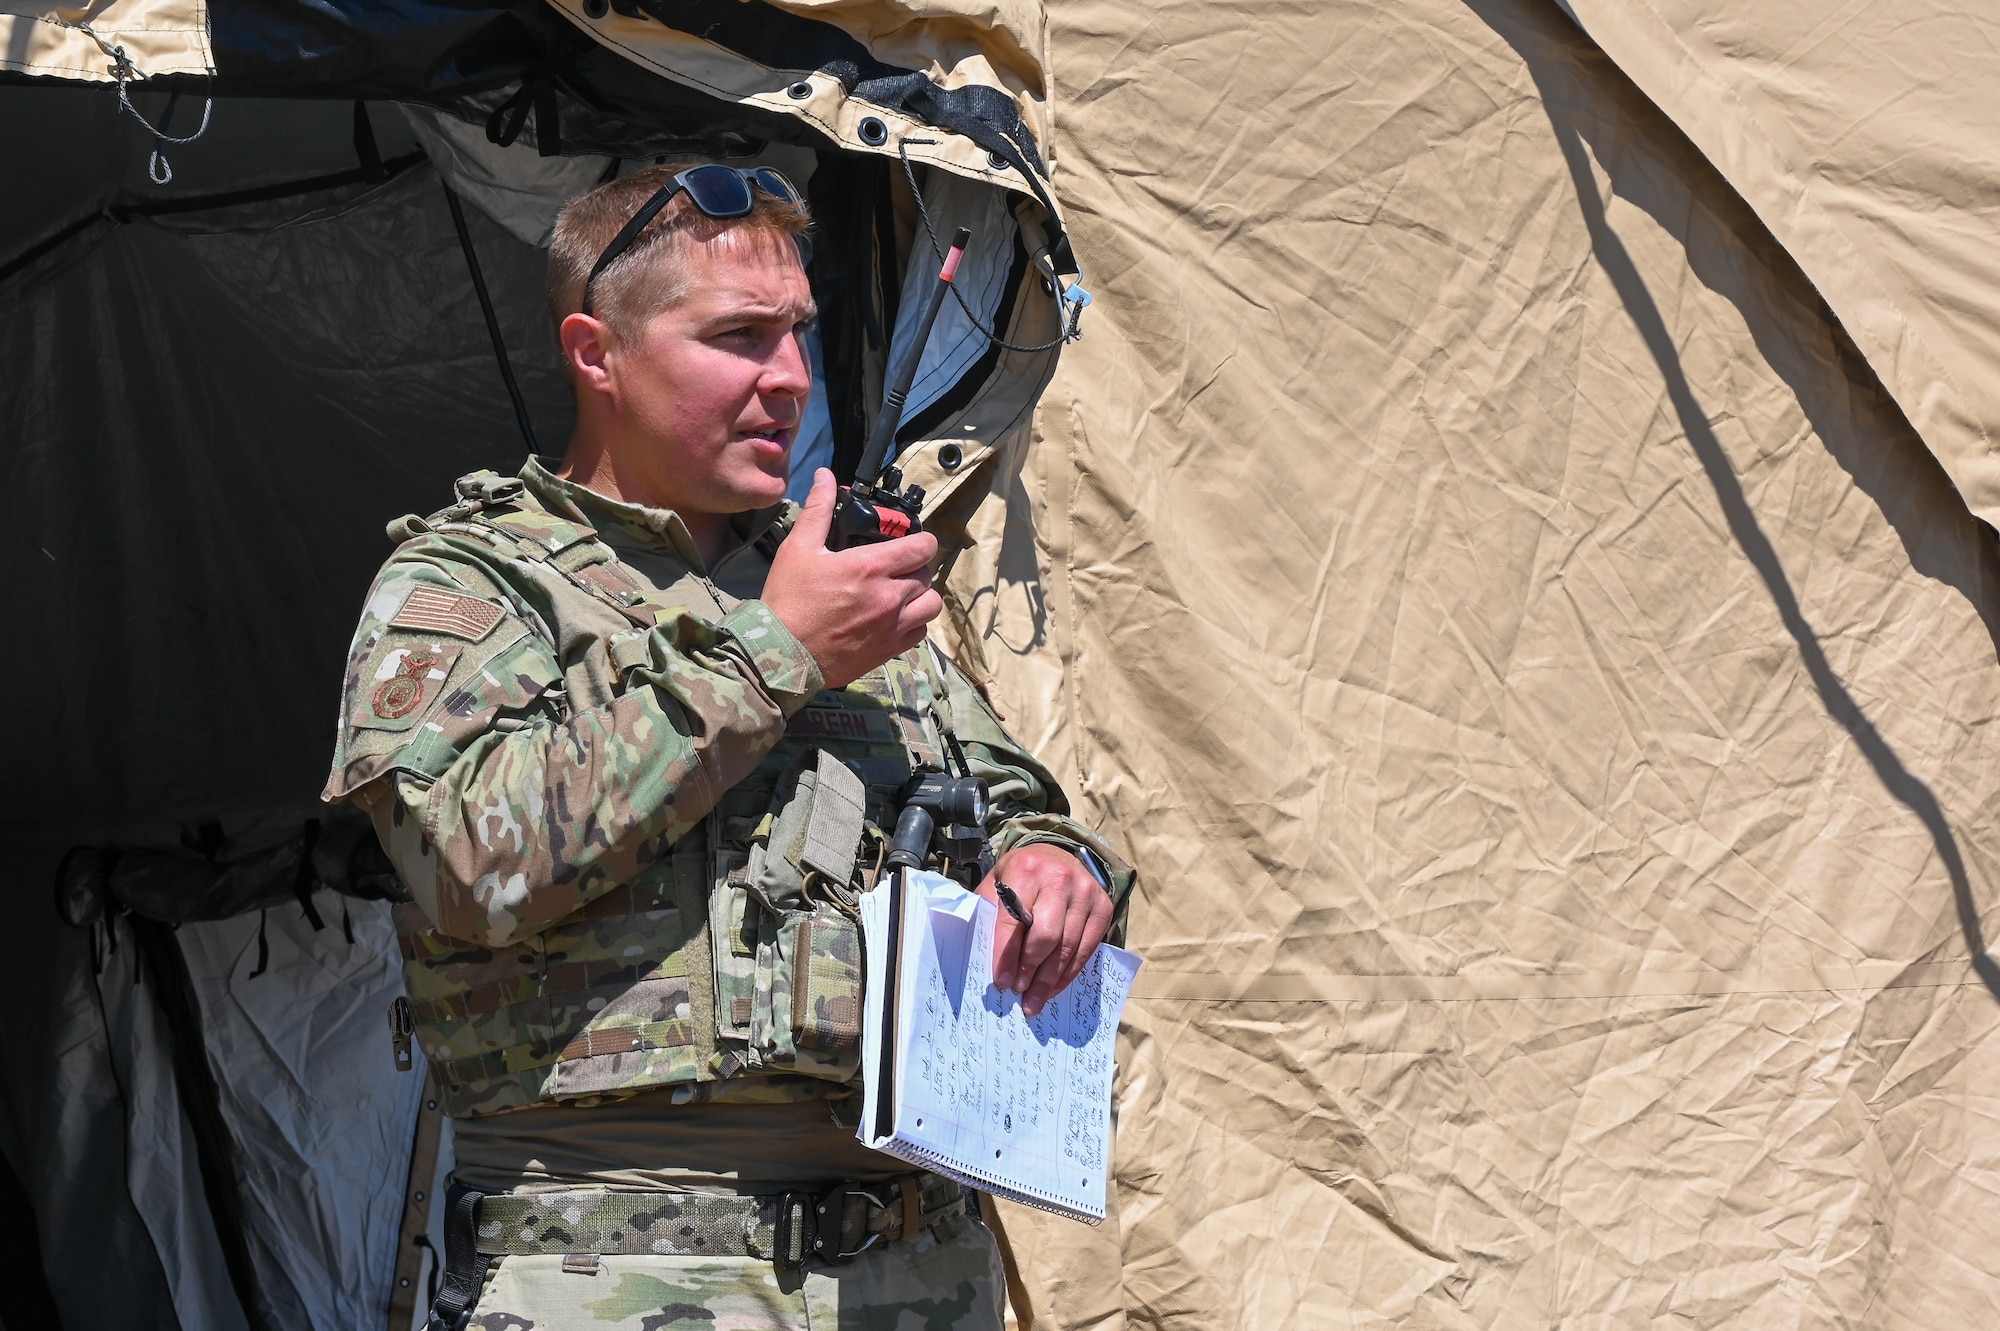 2nd Lt. Dan Dibbern, squad leader with the 155th Security Forces Squadron, completes a radio call in his zone during a simulated riot as a part of the Patriot 21 exercise at Fort McCoy, Wis., June 16, 2021. Patriot 21 is a training exercise for civilian emergency management and responders to work with military entities during natural disasters.